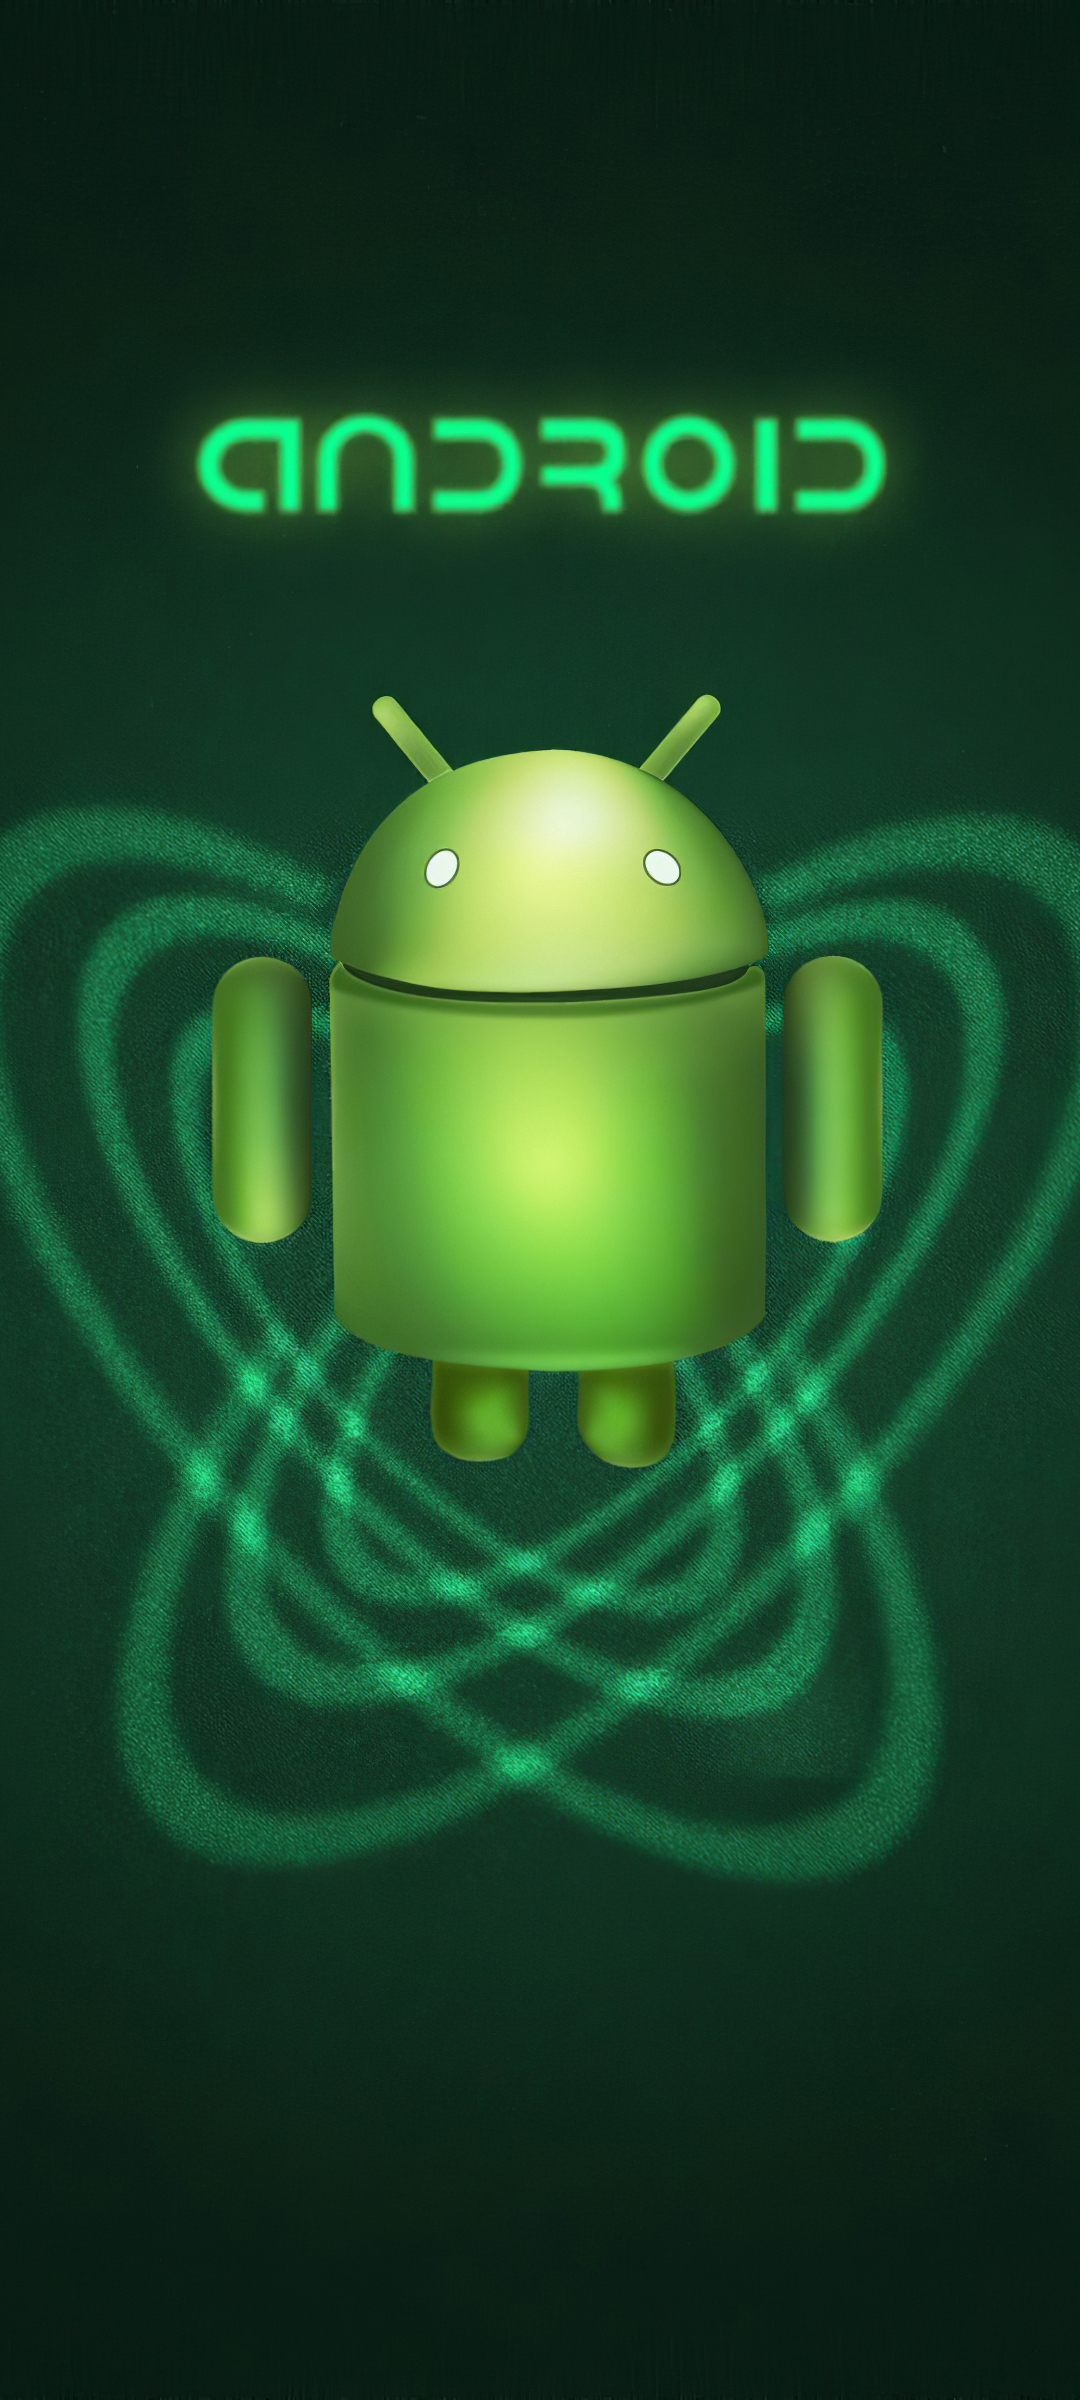 technology, android, android (operating system), logo